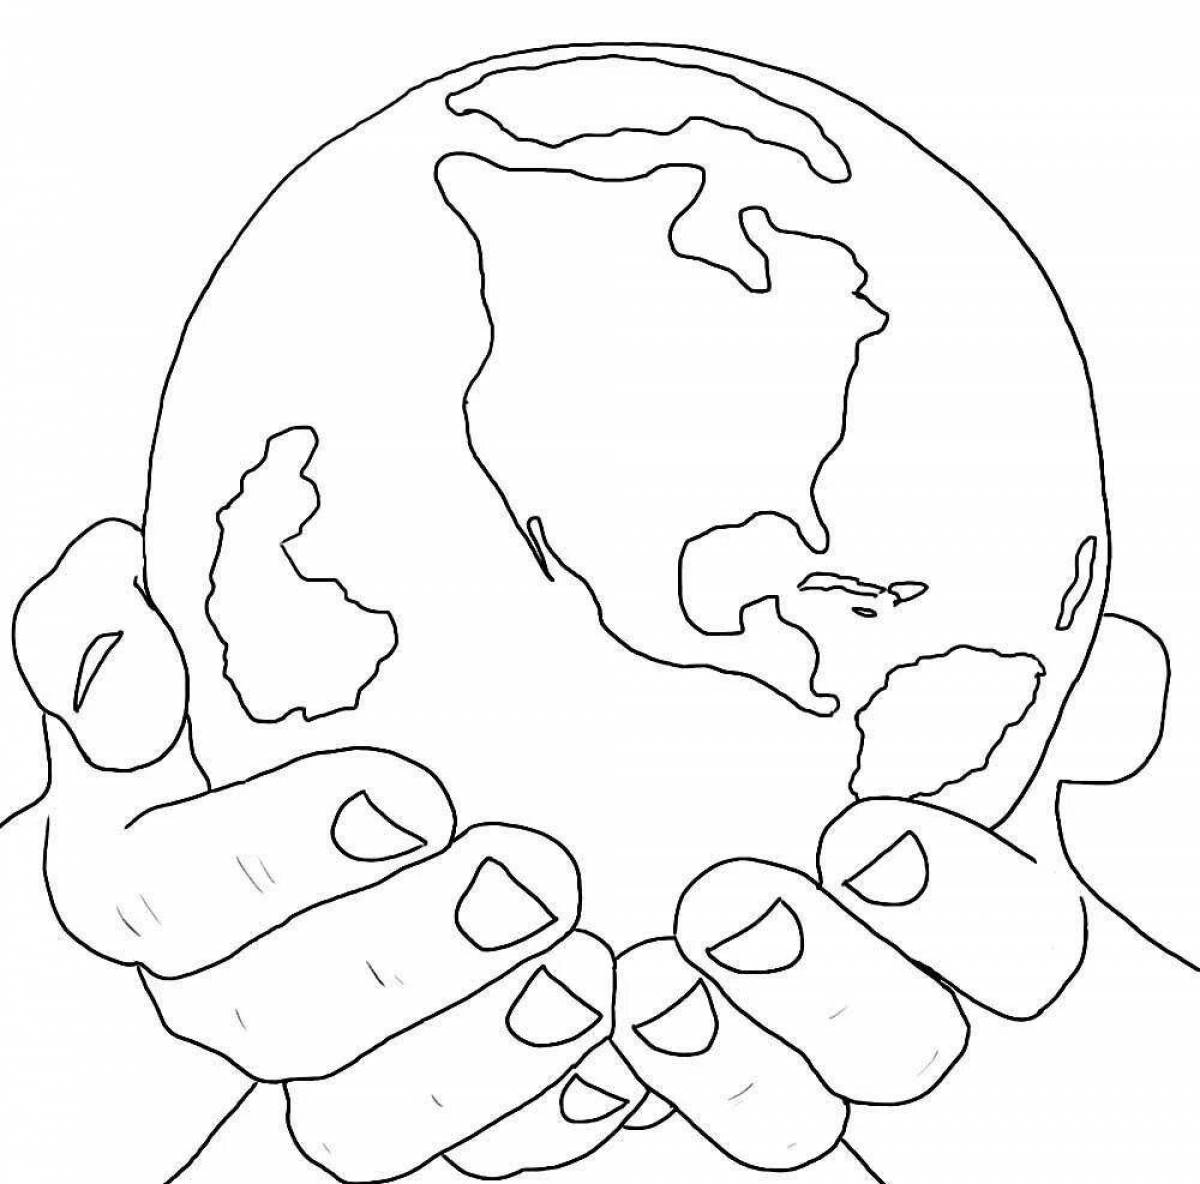 Let there always be peace shiny coloring page